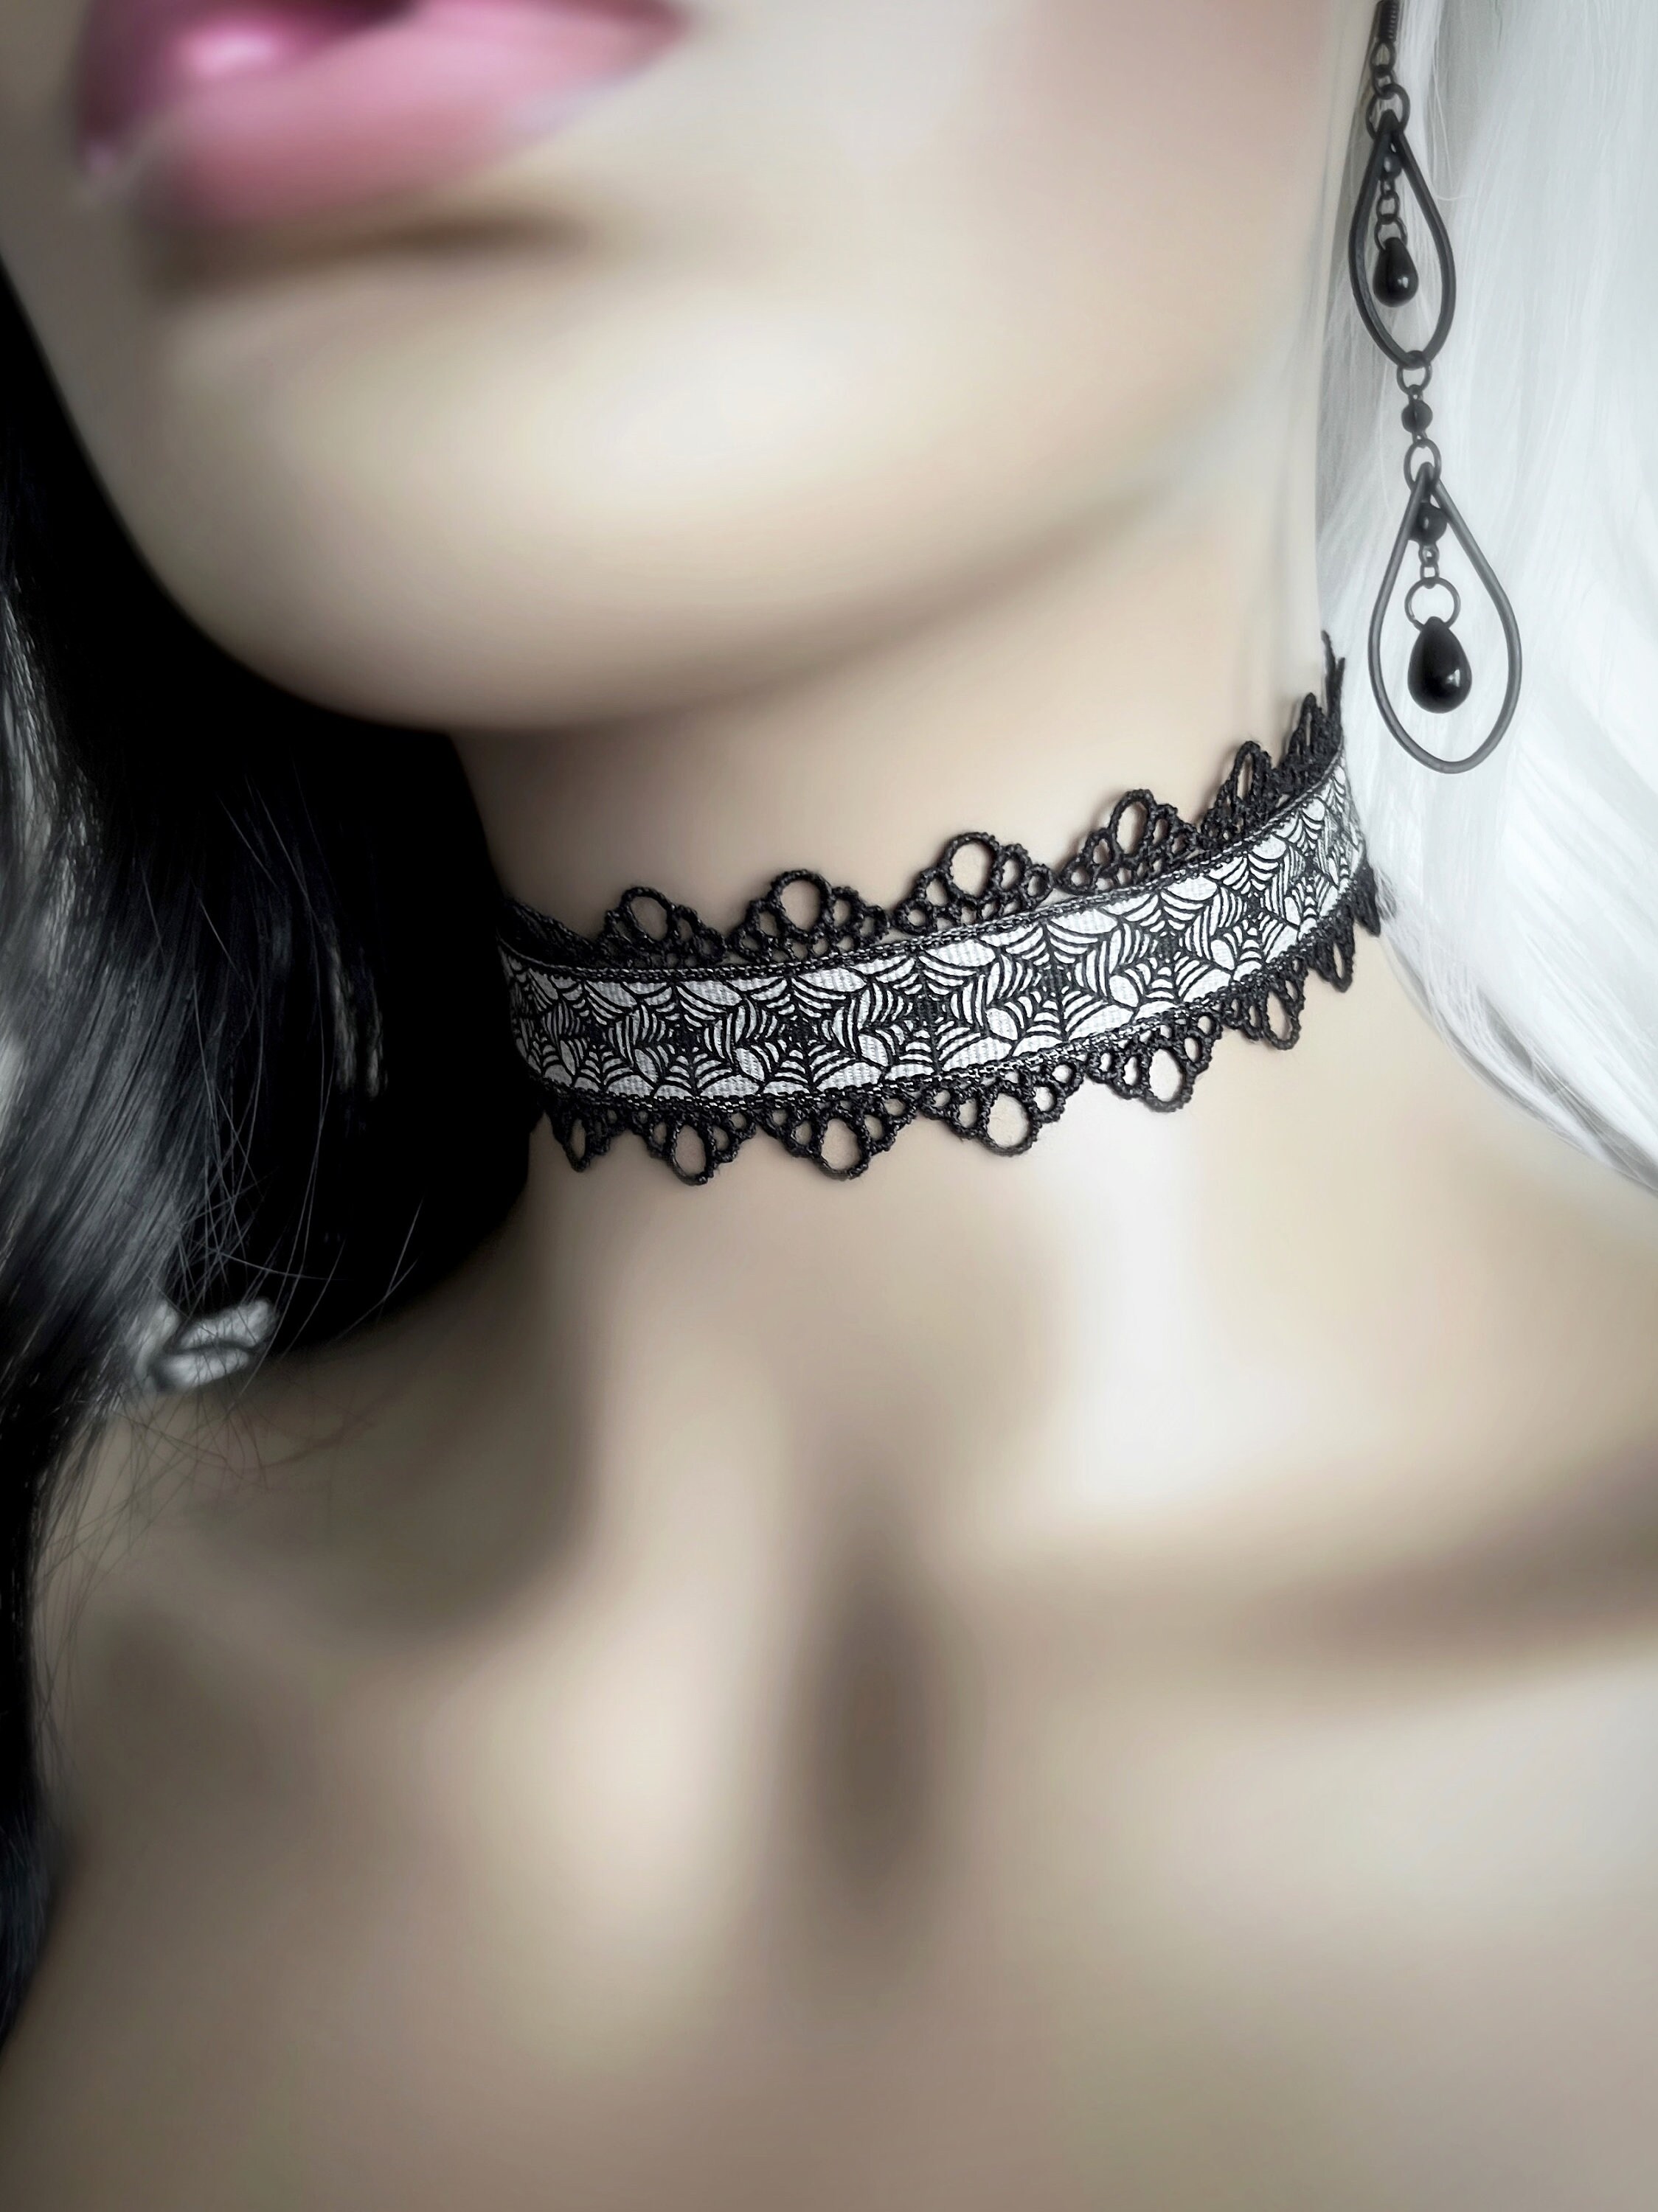 Black Fishnet Lace Ribbon Choker Necklace - Wide Gothic Victorian Mesh Collar